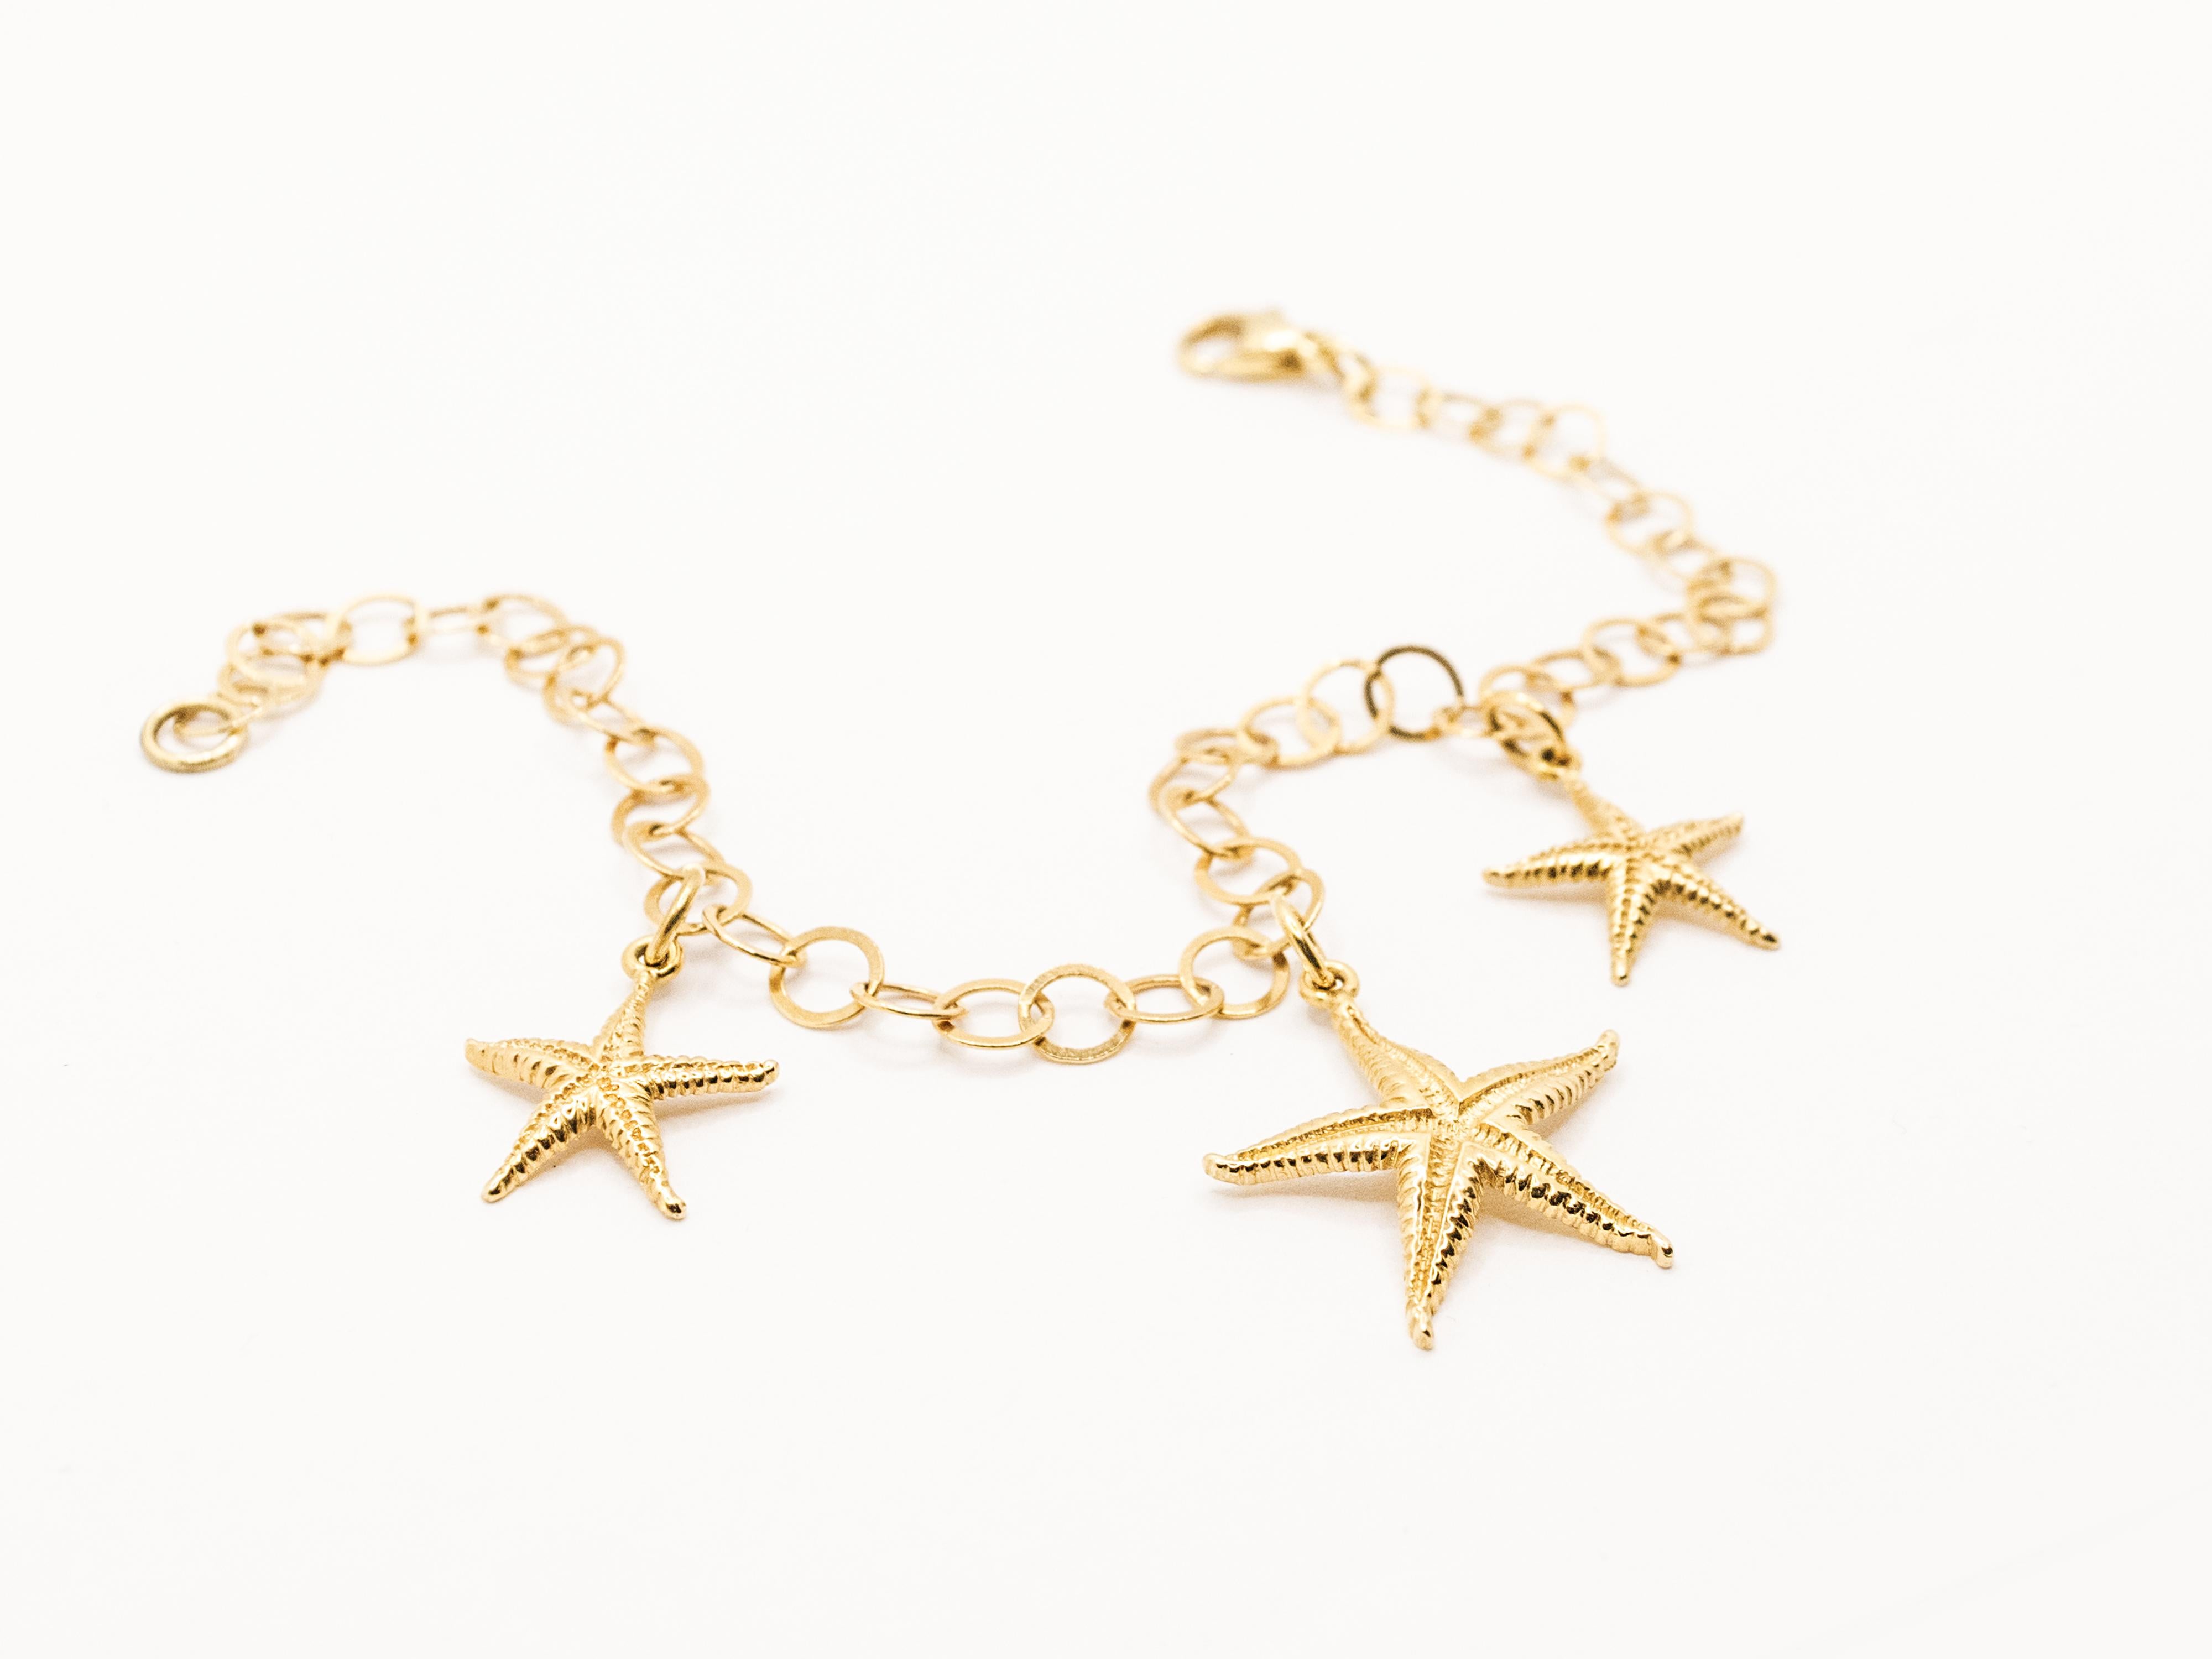 A unique bracelet completely handmade embellished with three starfish charms.
The round link is hand made too and it gives the possibility to resize the bracelet ( length is 21 cm/ 8,26 in ).
The charms are carved in a very naturalist way and they